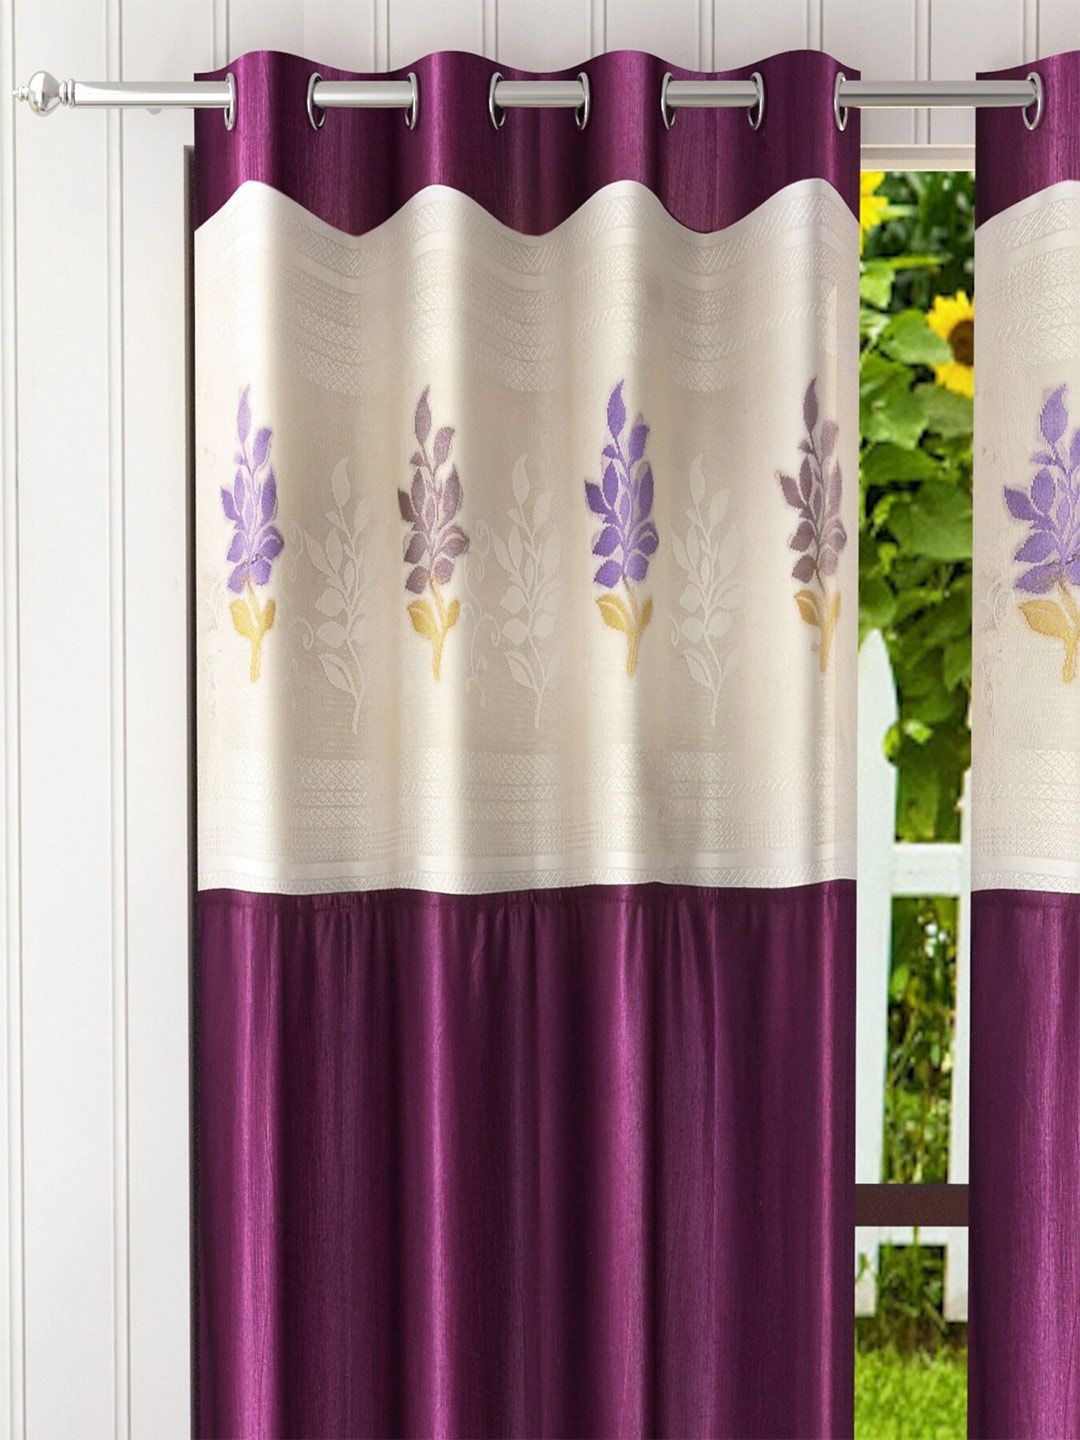 Homefab India Burgundy & Cream-Coloured Set of 2 Floral Sheer Window Curtain Price in India